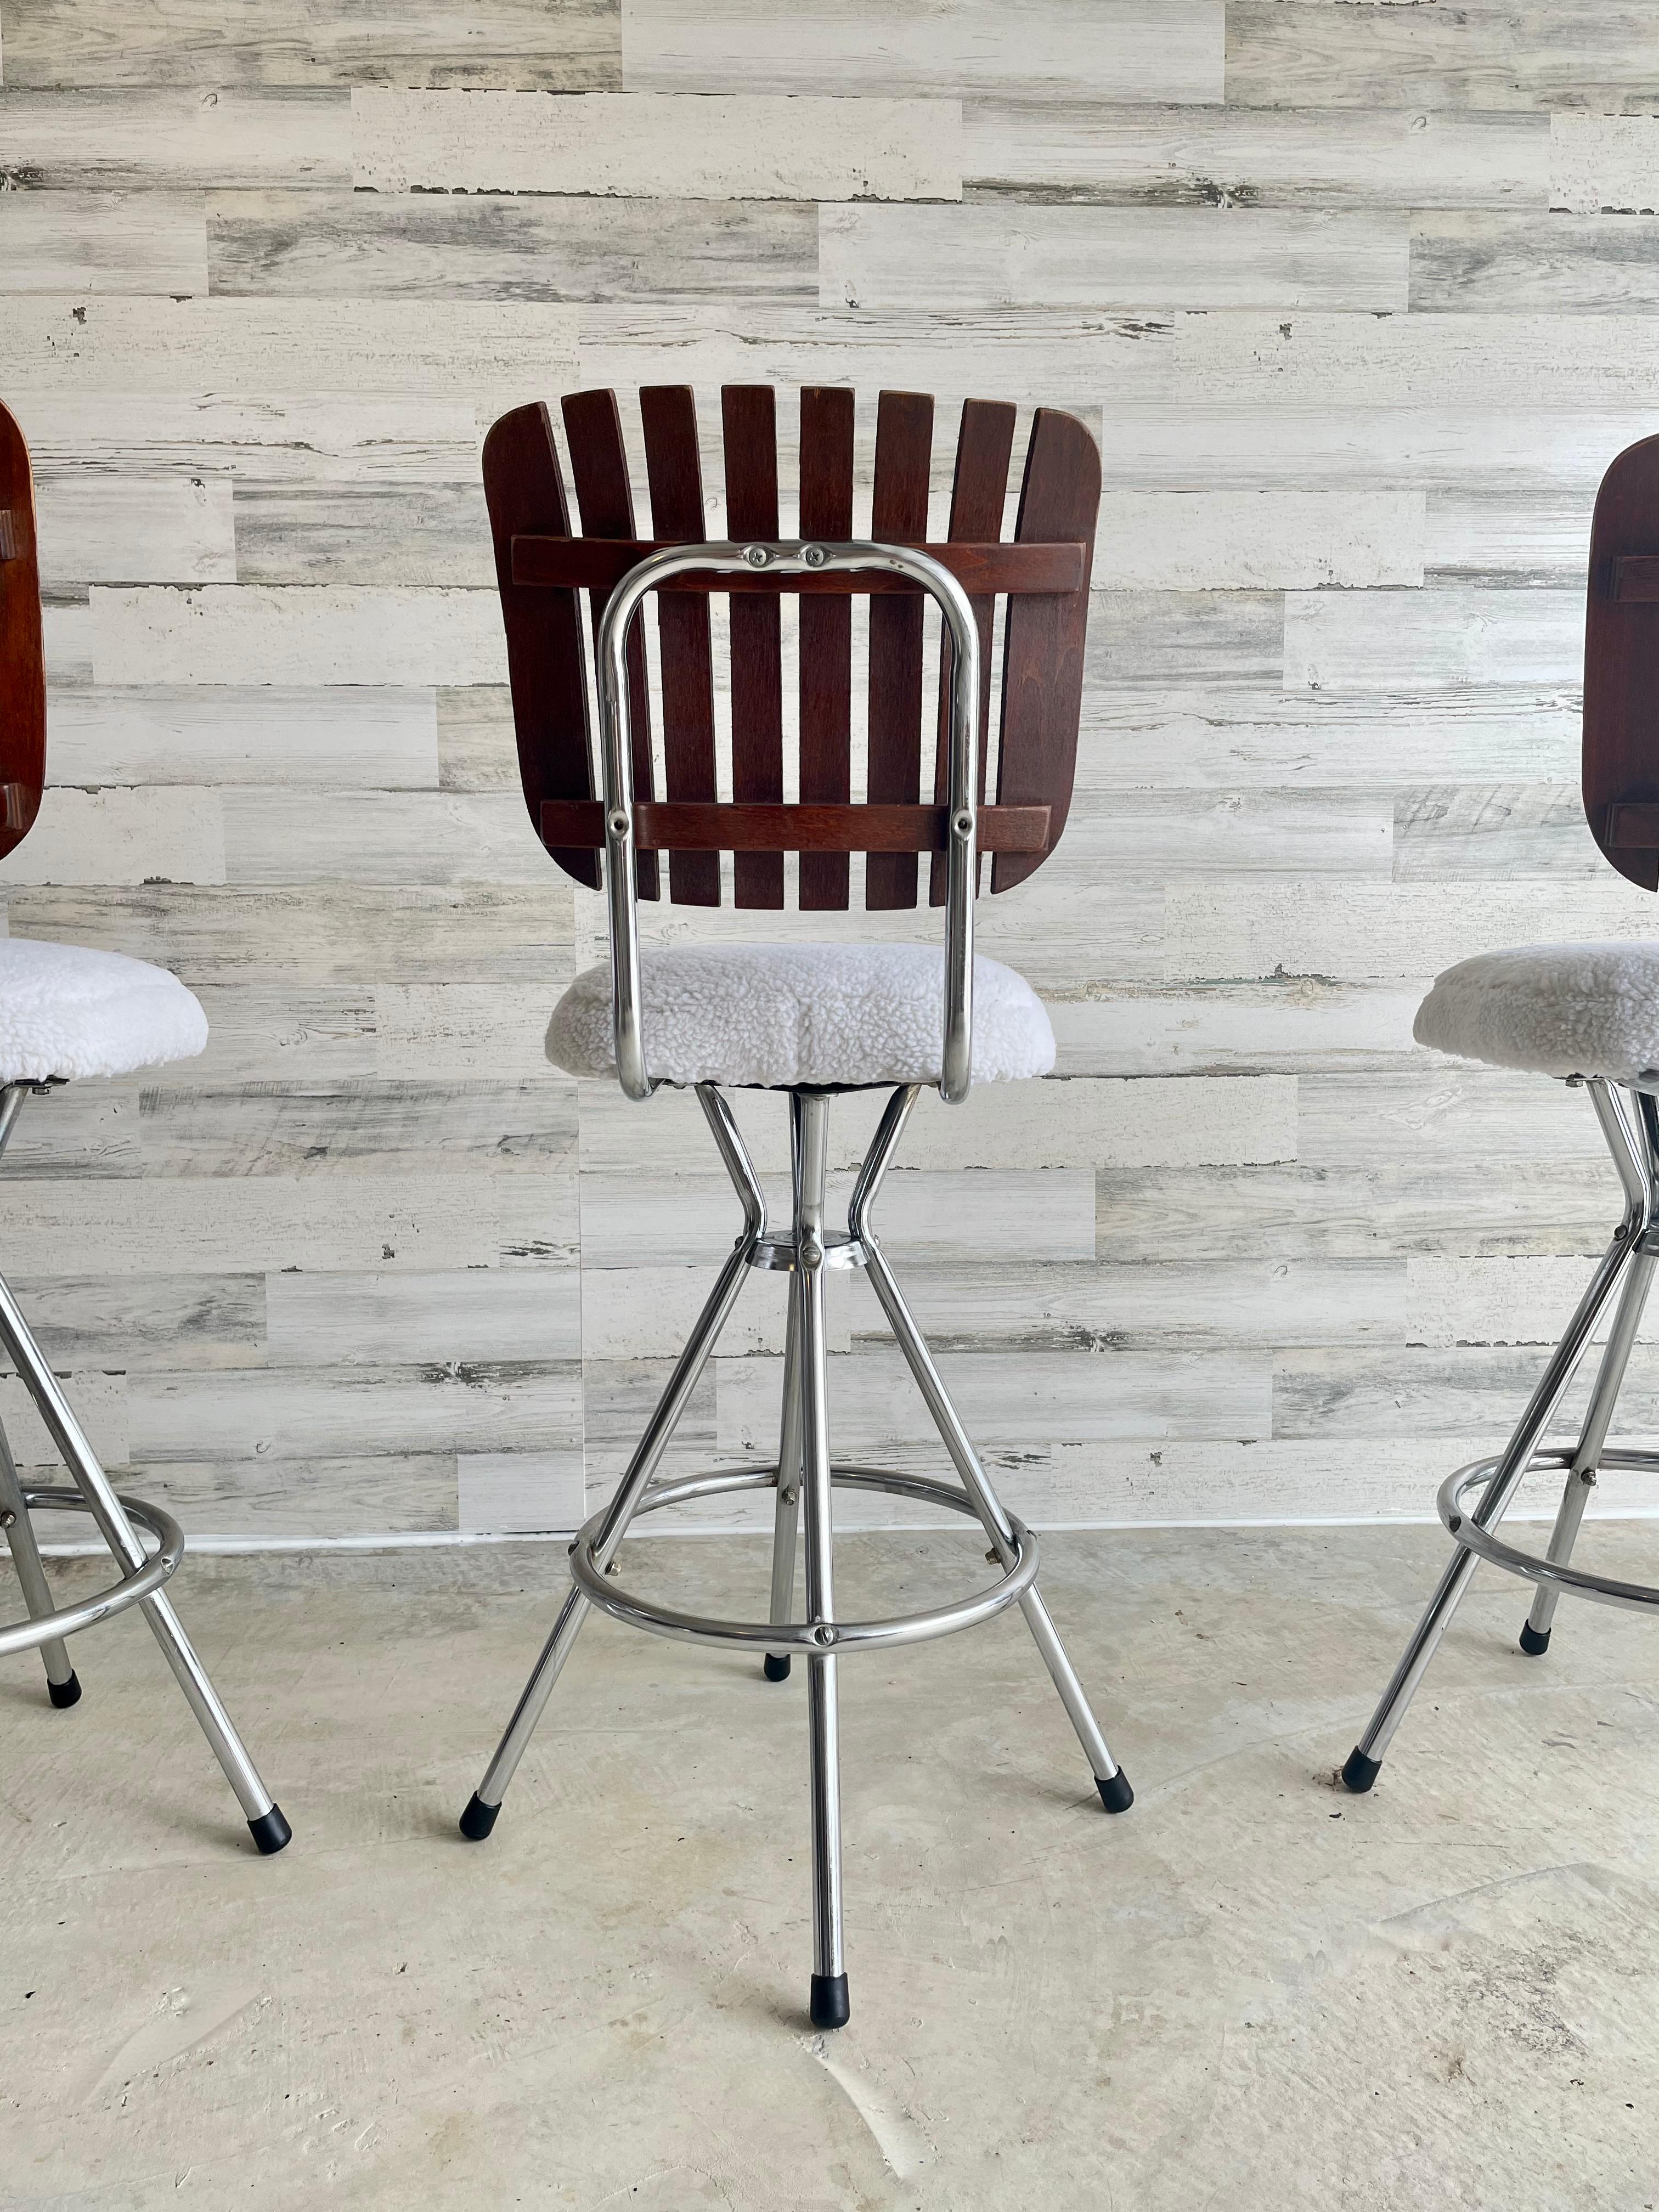 Wood slat back Arthur Umanoff style barstools with a fuzzy white Sherpa seat. Swivel metal base with new black rubber feet. Perfect for vintage modern style home.